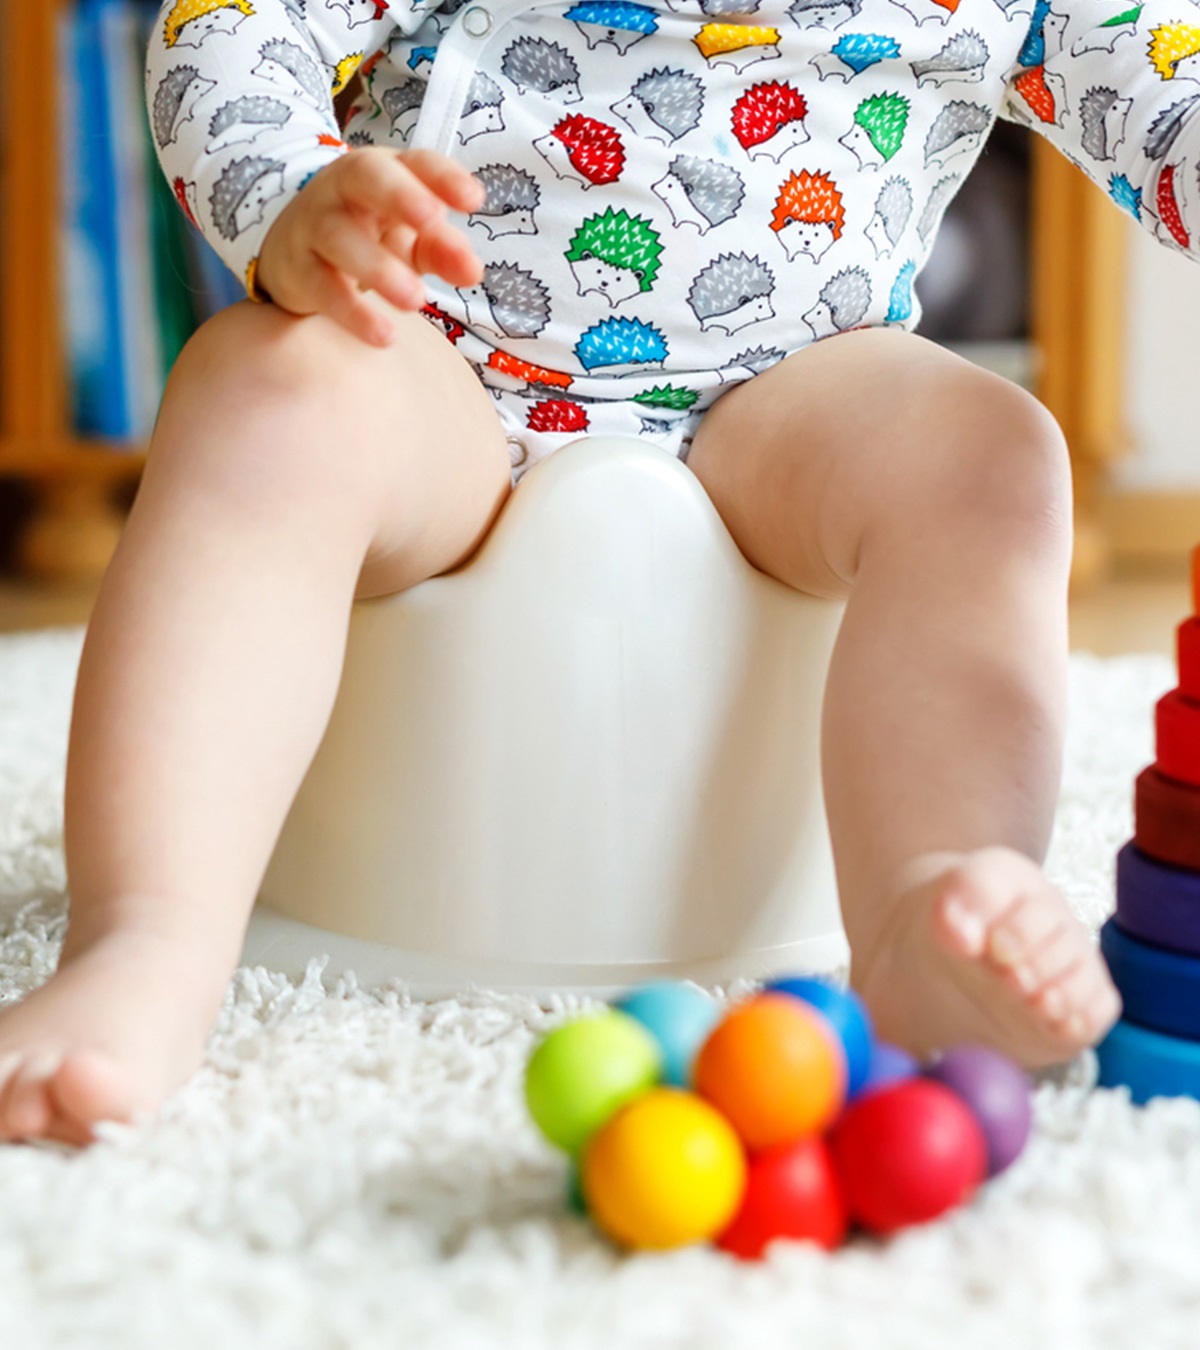 21 Funny Potty Training Games For Toddlers To Play